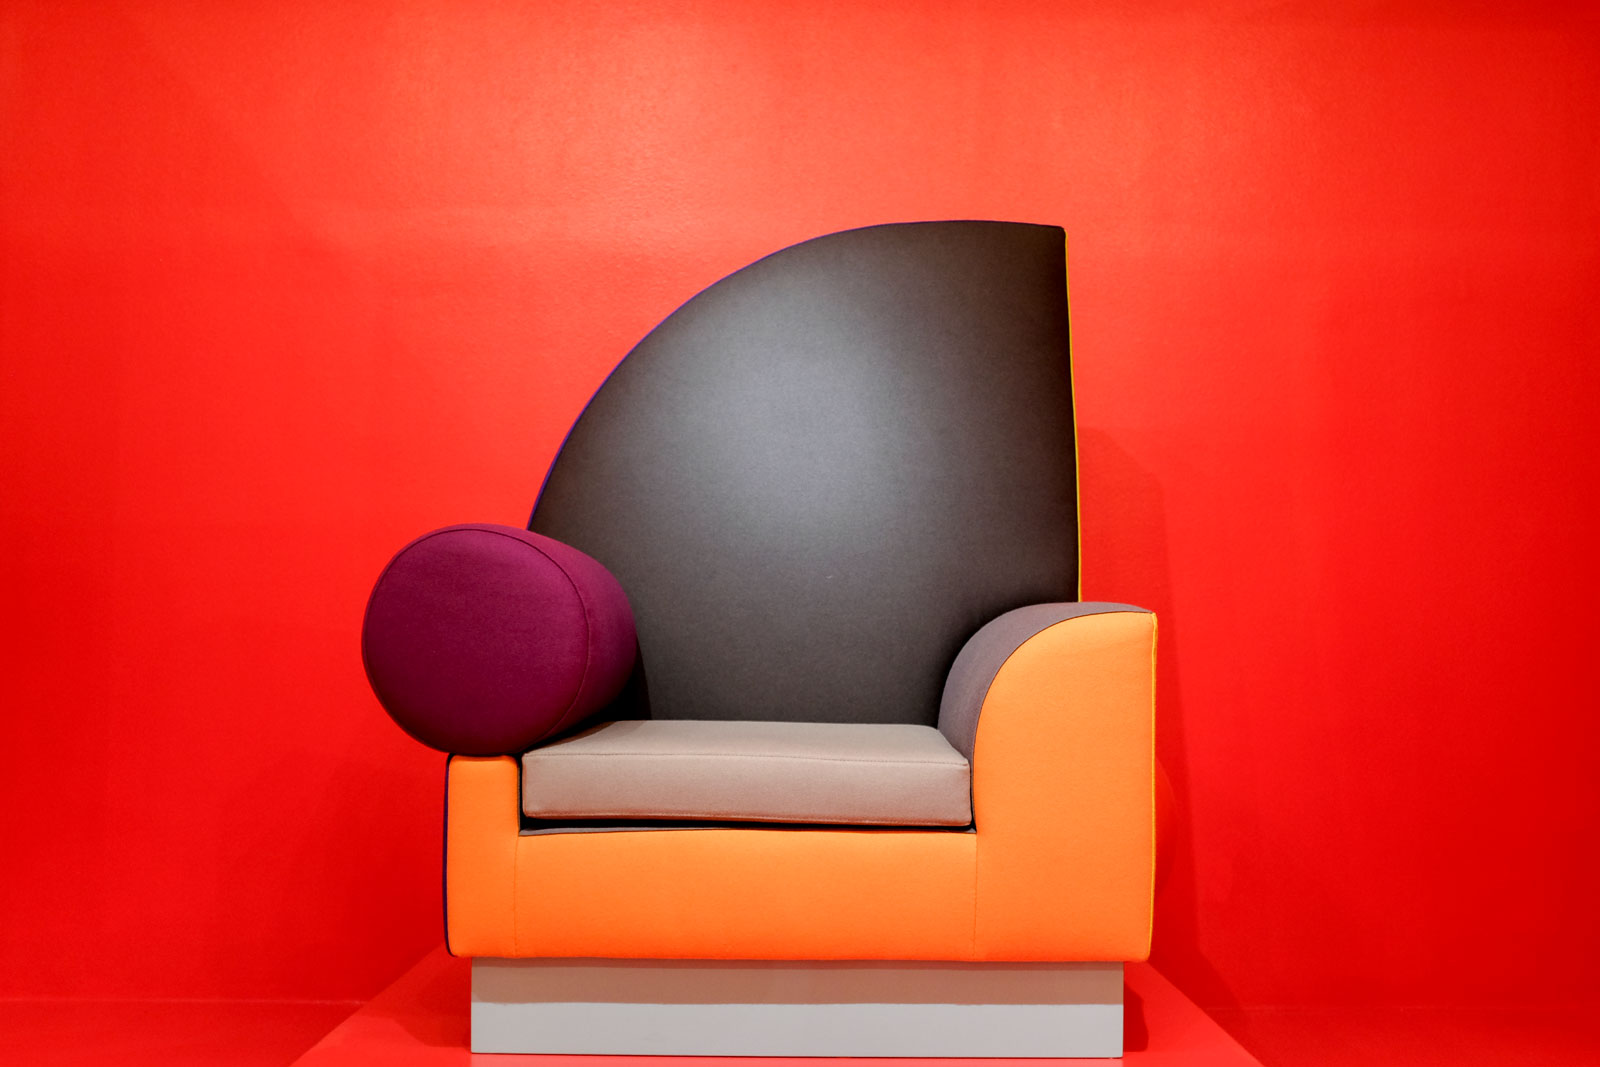 A Memphis Milano Chair at the Modernism Museum